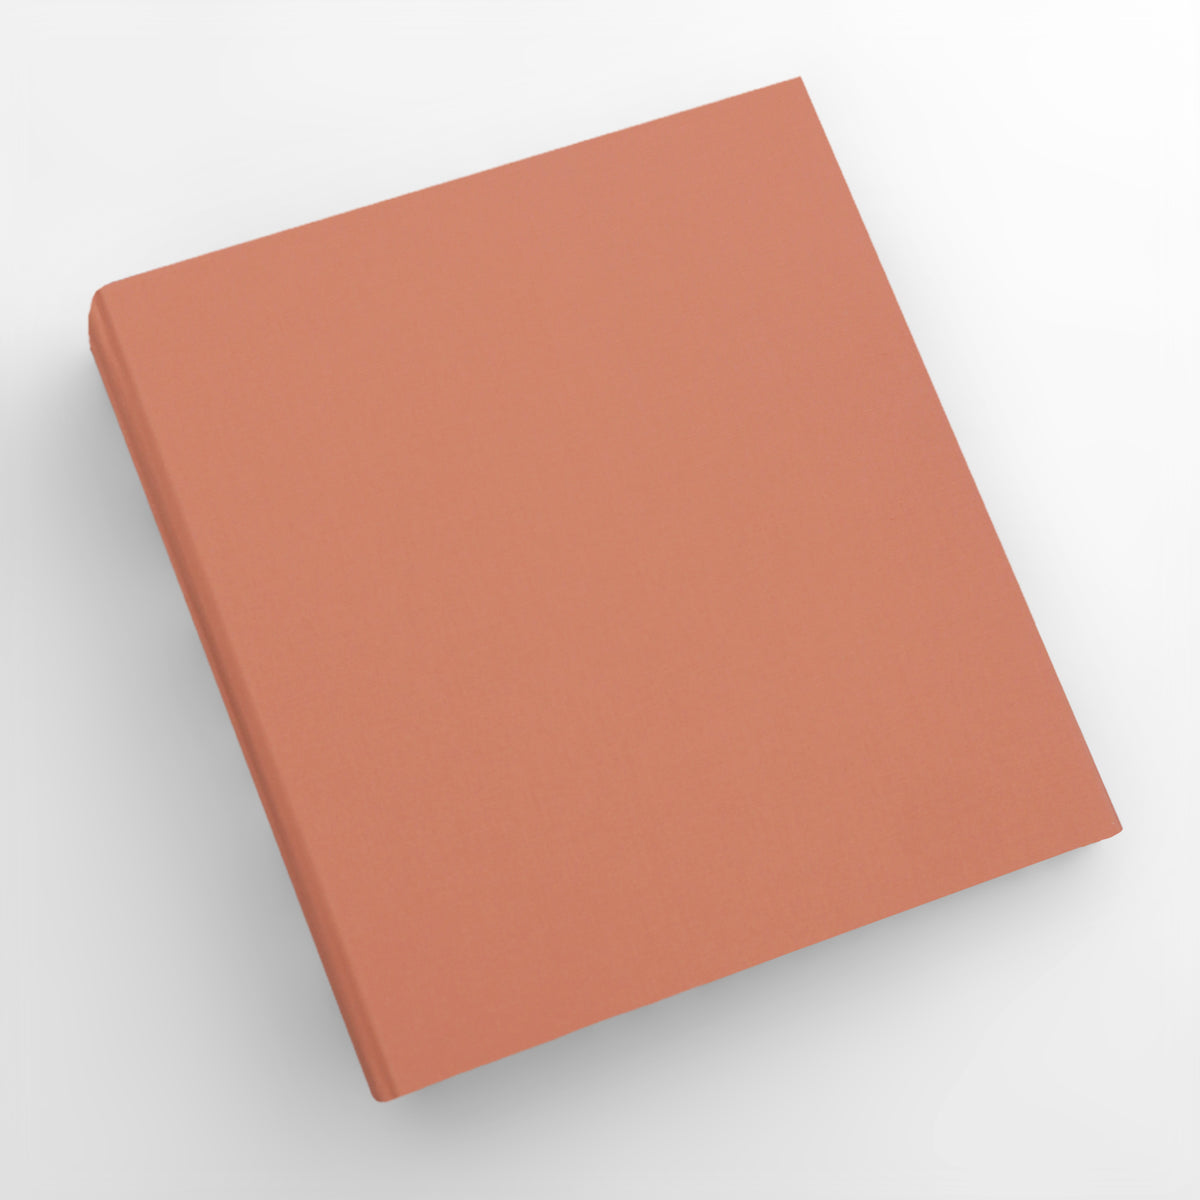 Large Photo Binder (for 4x6 photos) with Coral Cotton Cover